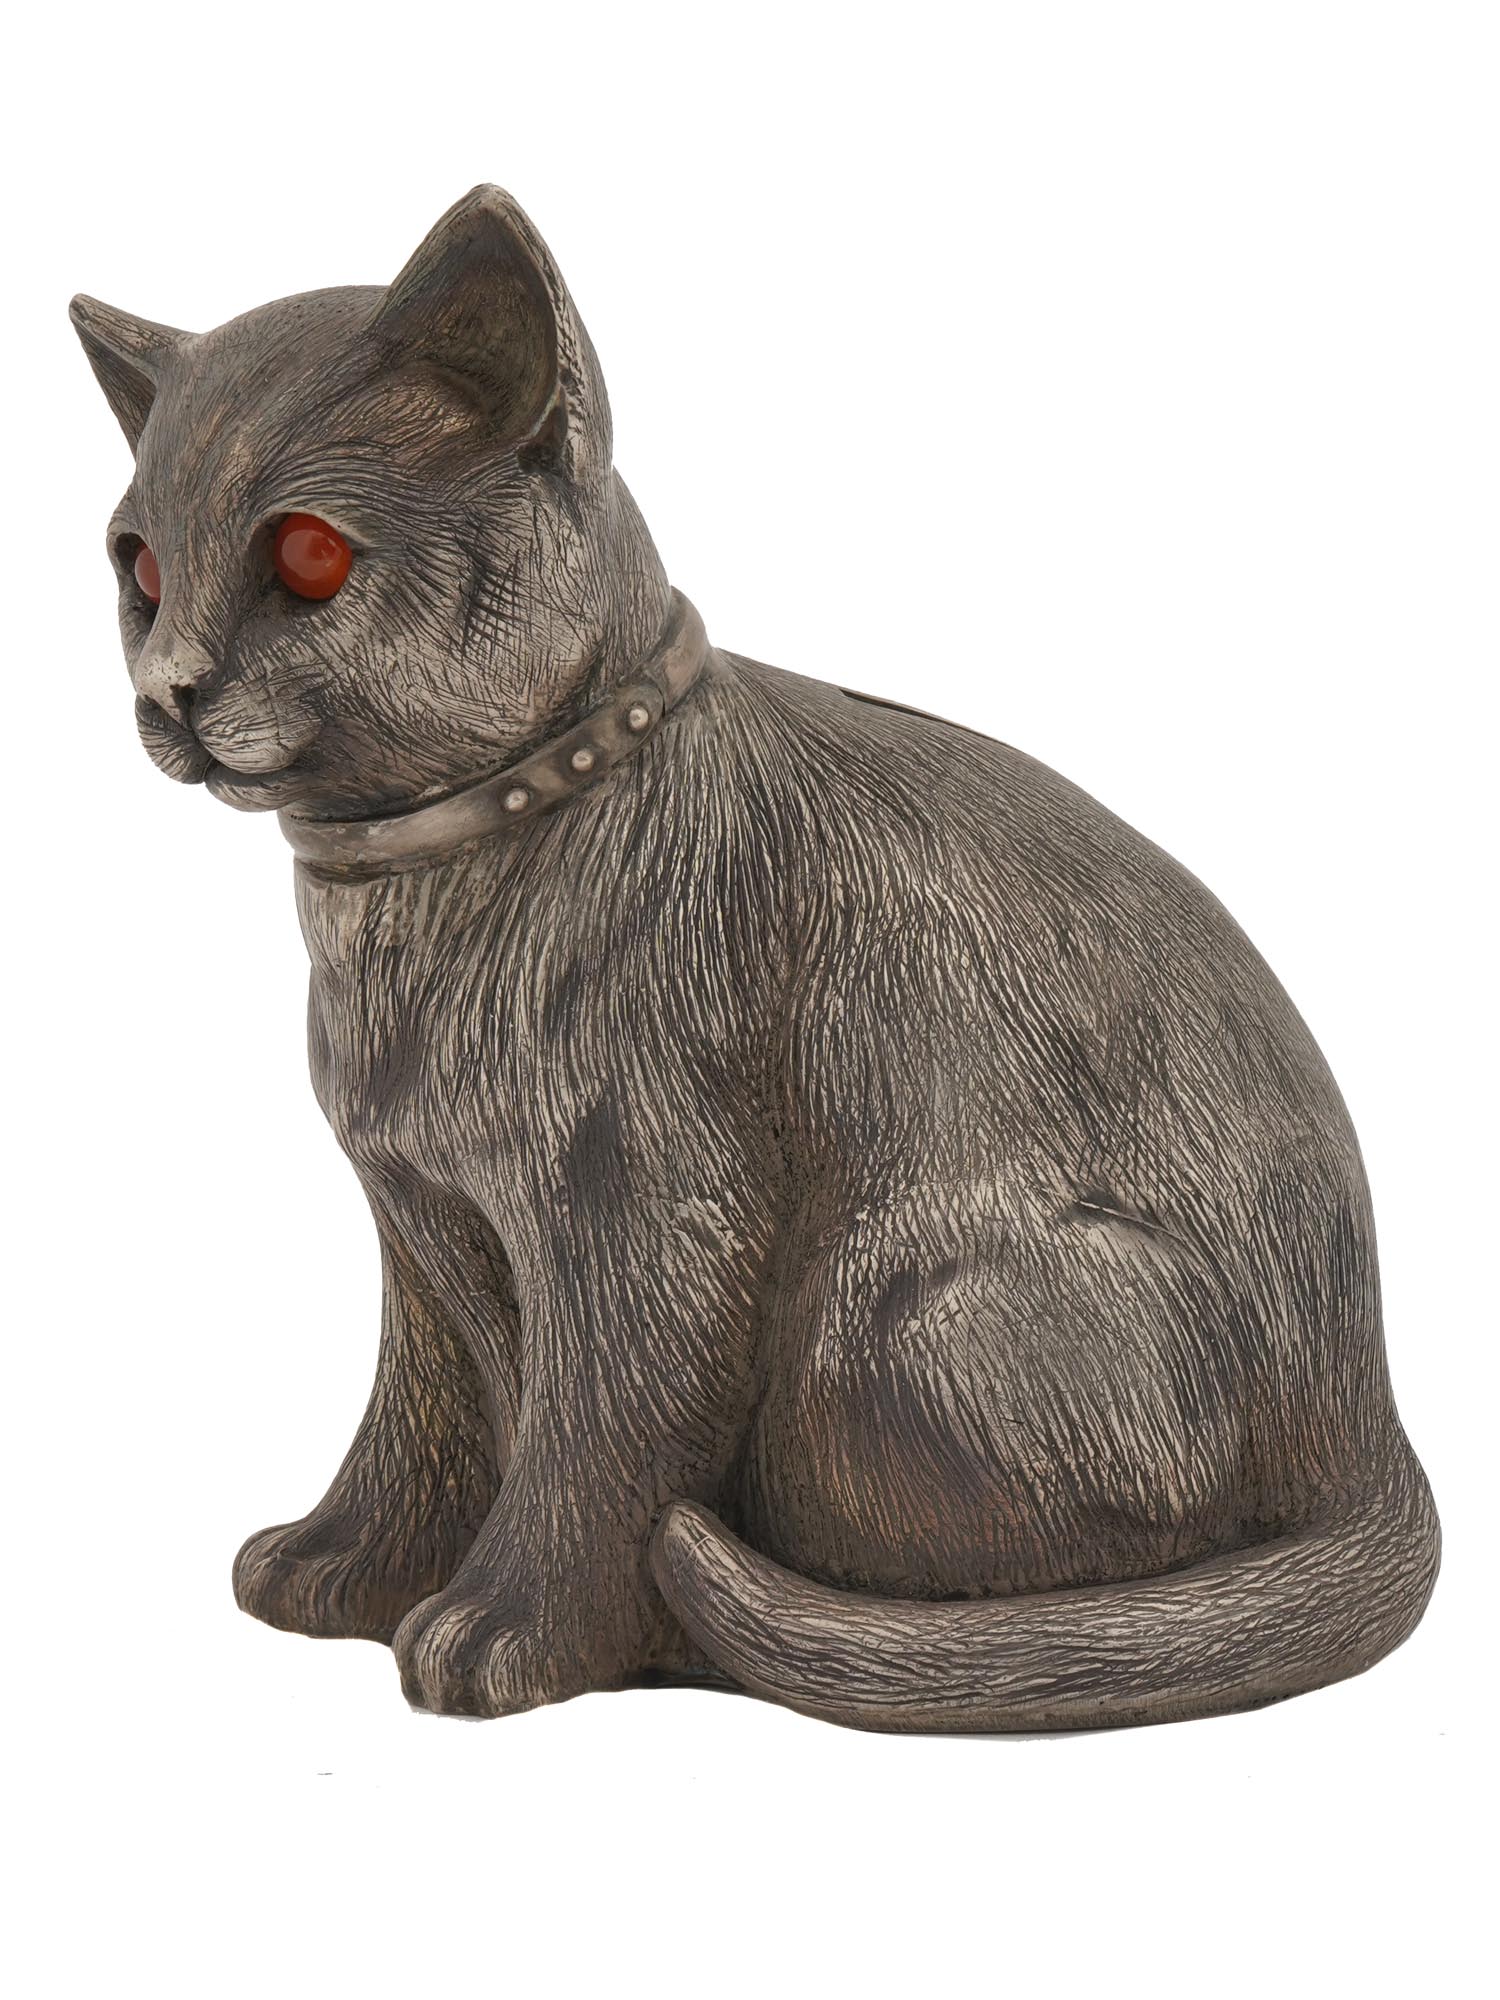 RUSSIAN 84 SILVER CARVED CAT FIGURINE MONEY BANK PIC-1